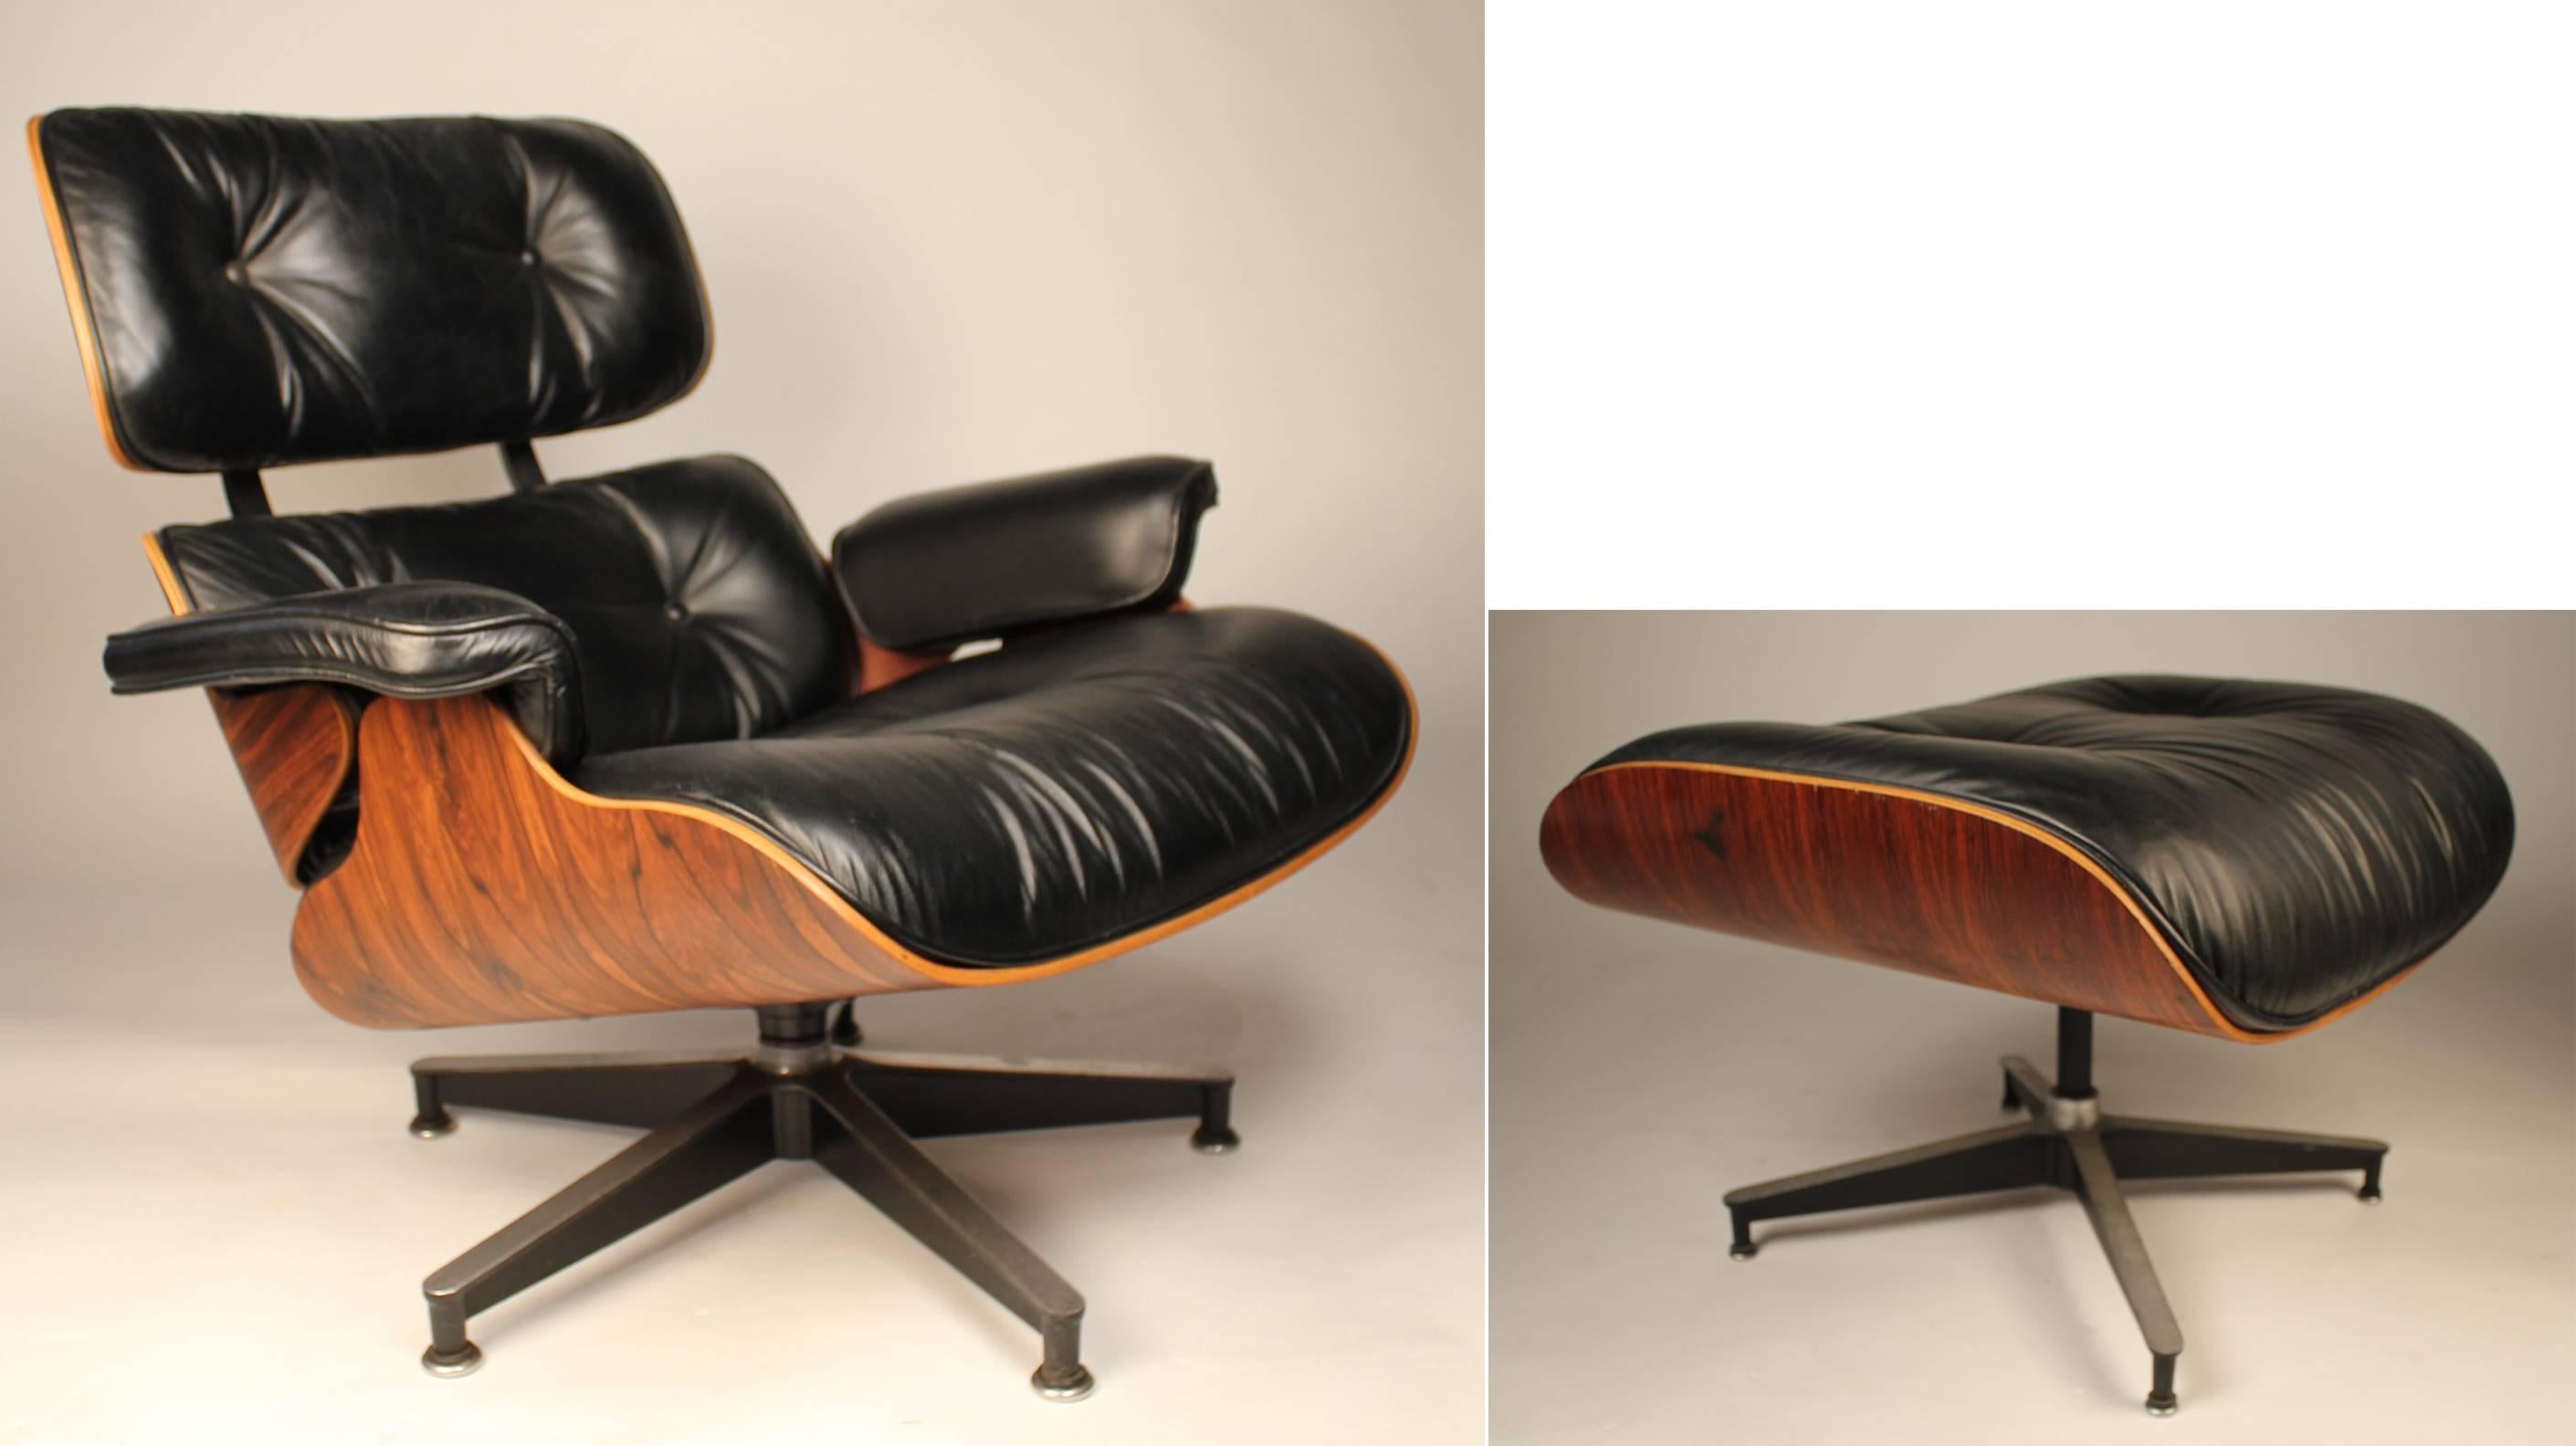 A very clean example of a vintage modern icon. Charles Eames 670 & 671 Lounge chair and ottoman produced by Herman Miller. All intact and all original. Beautiful striations in the Brazilian Rosewood graining. A great example and yes, they are as